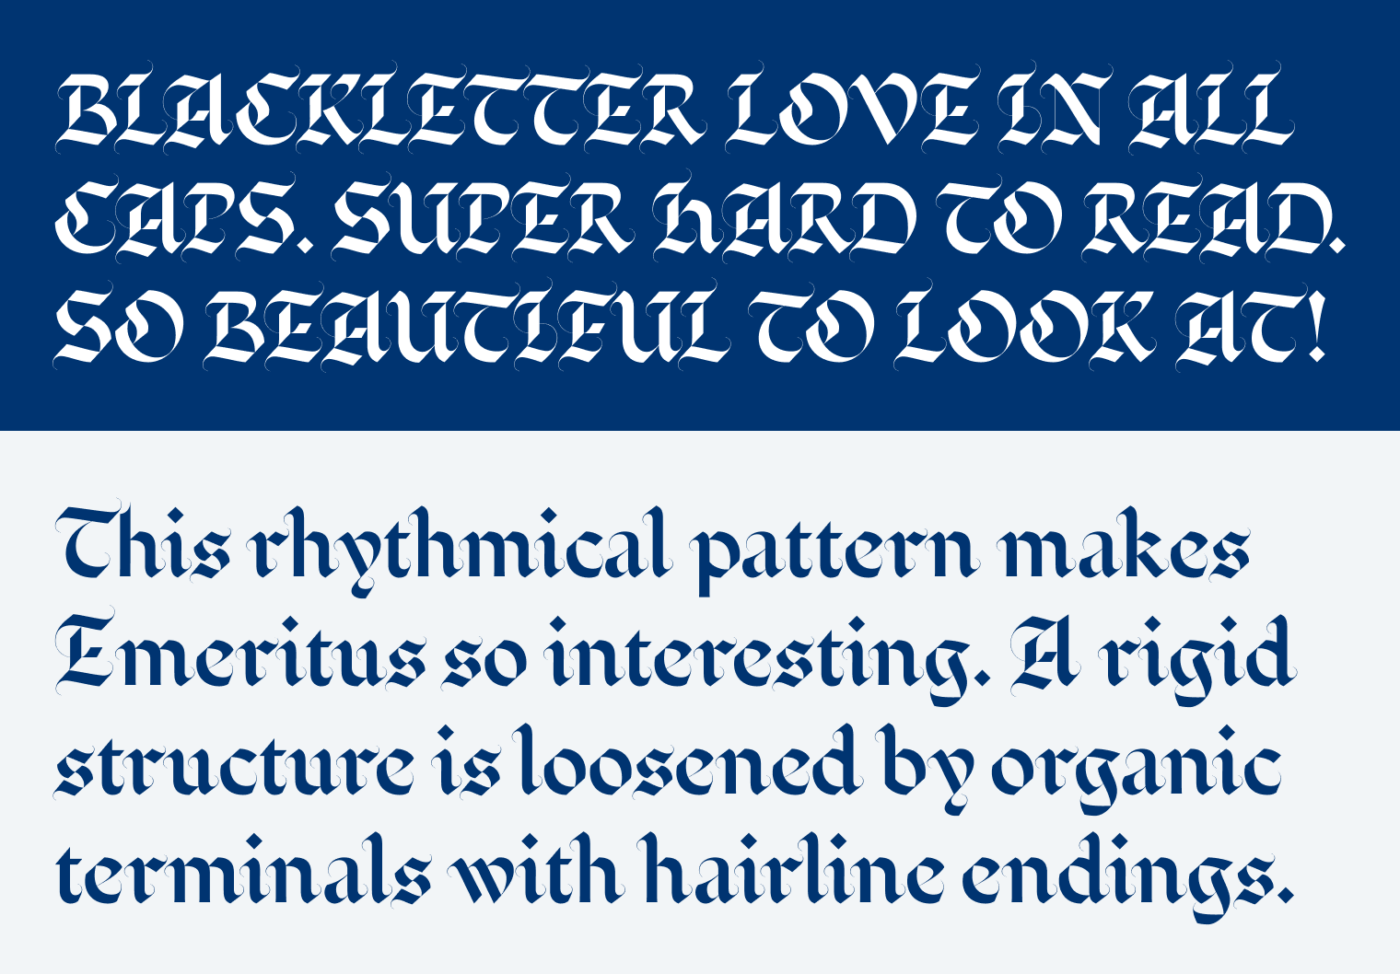 Blackletter Love in all caps. Super hard to read. So beautiful to look at! This rhythmical pattern makes Emeritus so interesting. A rigid structure is loosened by organic terminals with hairline endings.